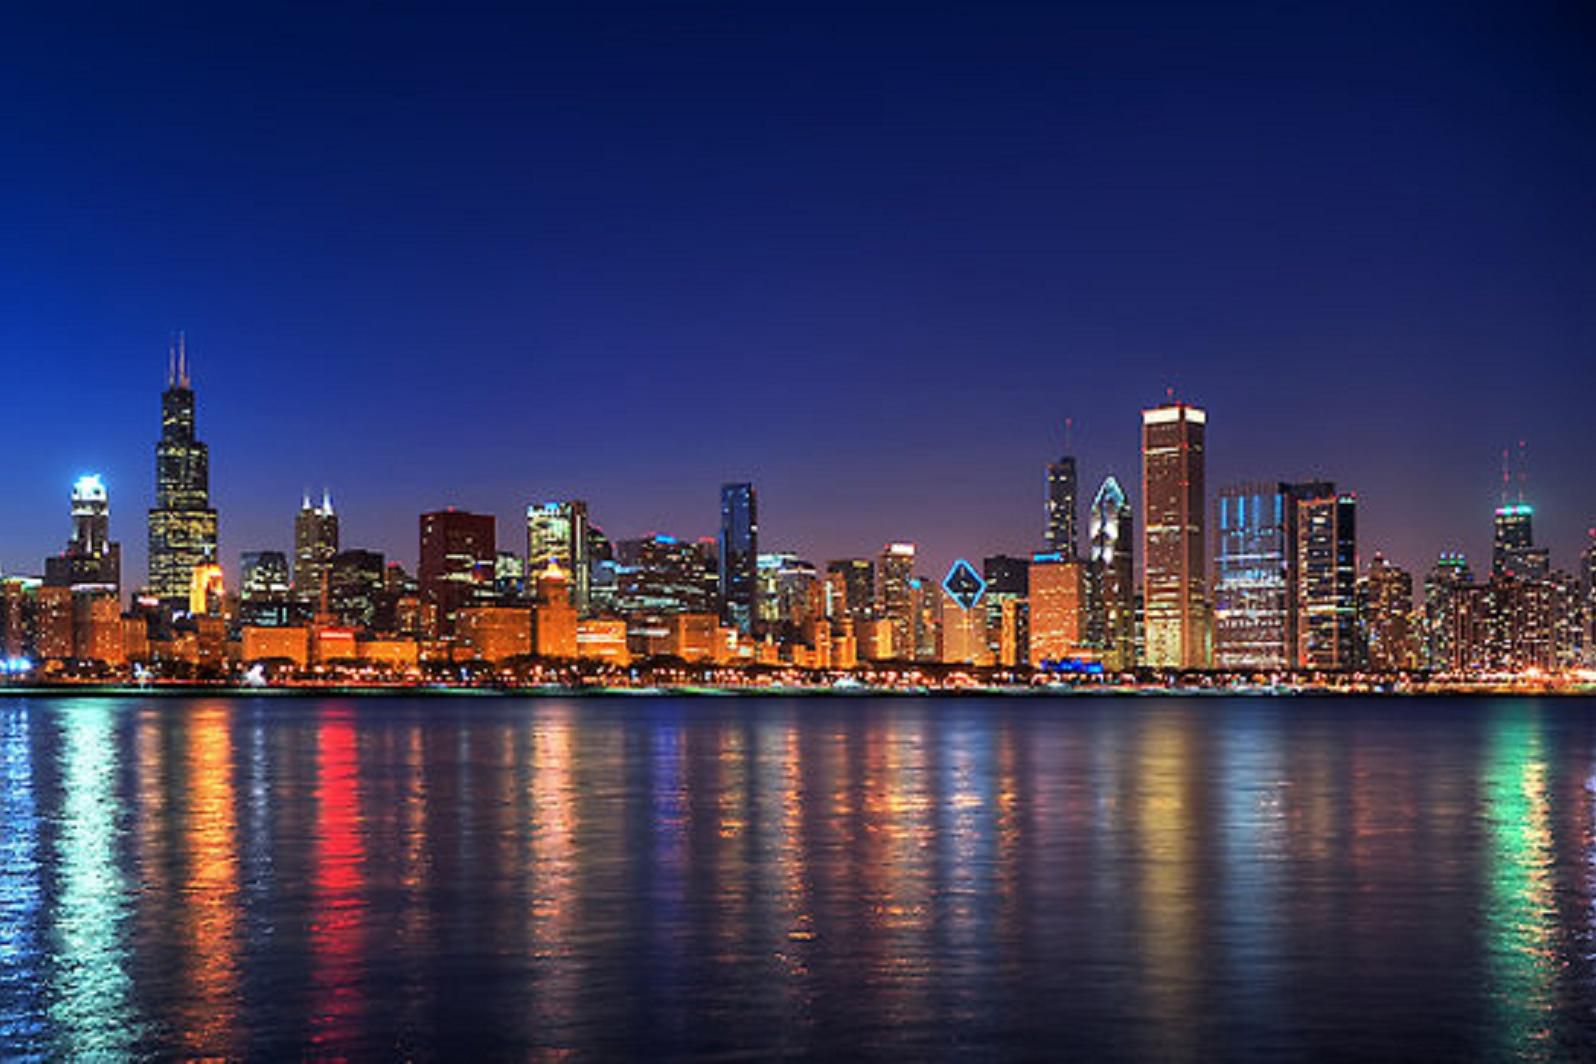 Take a relaxing stroll while enjoying the Chicago Skyline